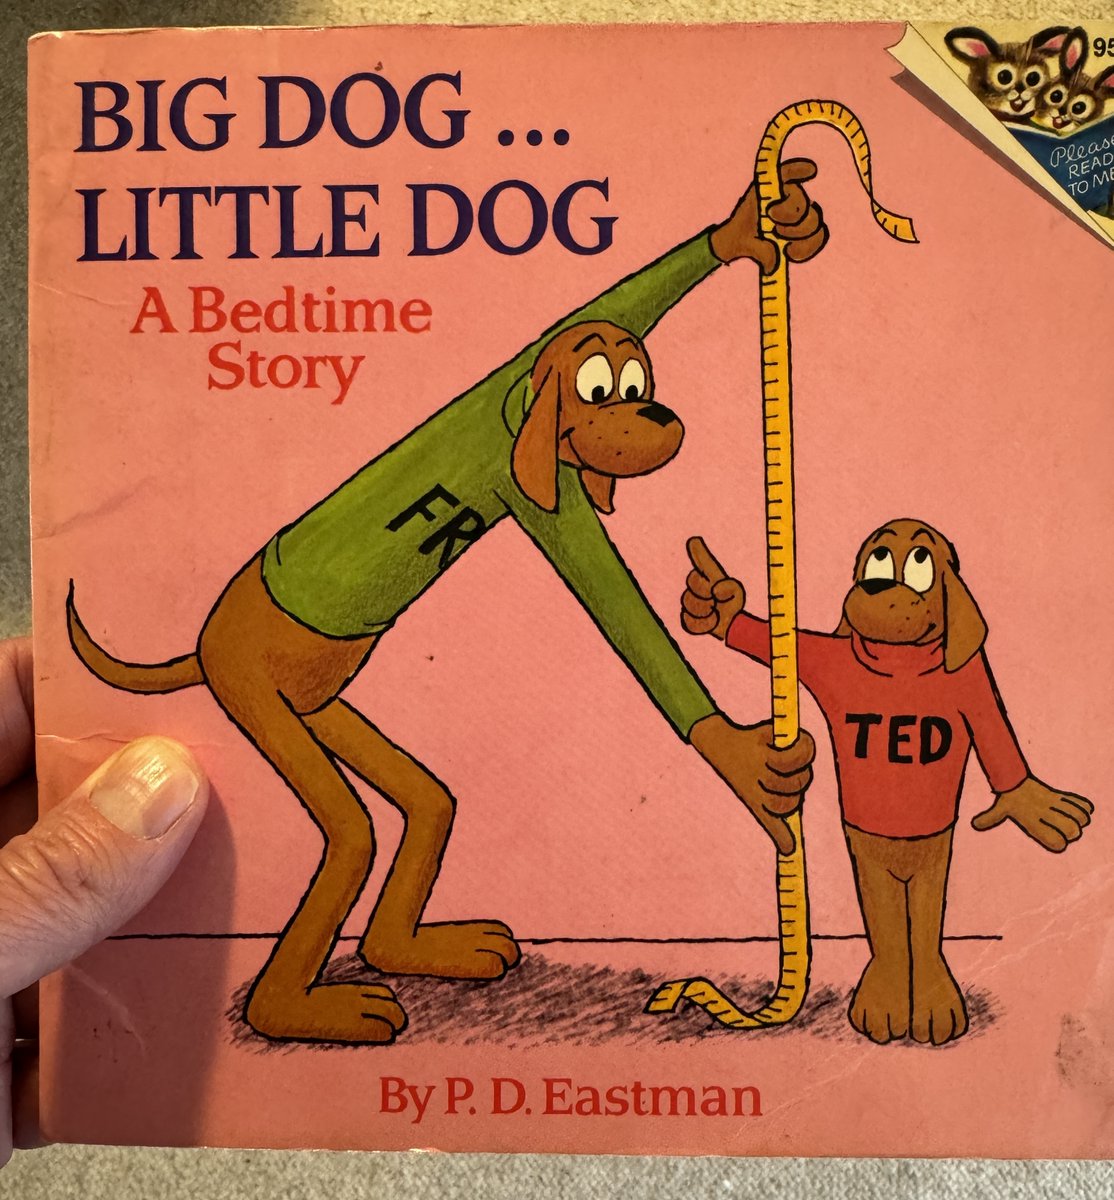 “Big Dog…Little Dog” by P.D. Eastman was my all-time favorite childhood book. I looked at the cover recently and saw that Fred (the tall dog) is measuring the height of Ted (the little dog) with a tape measure. It’s a funny coincidence because I now work at NIST!” – Ben Stein